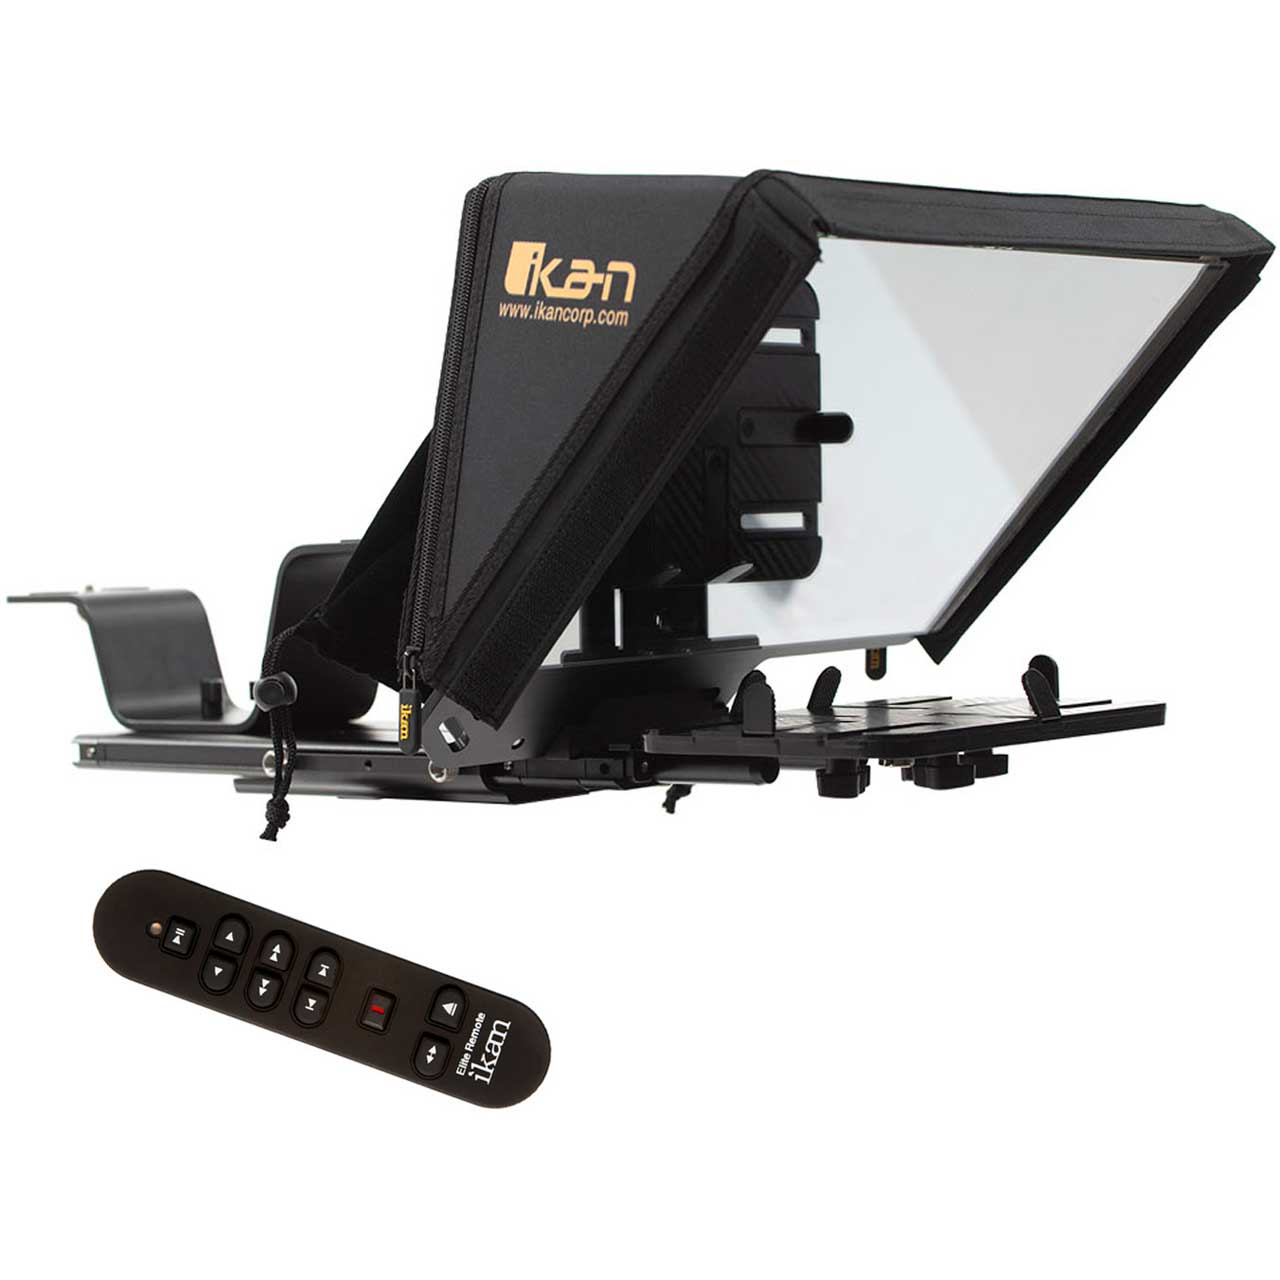 ikan PT-ELITE-PRO2-RC Elite Universal Tablet - iPad - and iPad Pro Teleprompter with Remote Control - Version 2 PT-ELITE-PRO2-RC